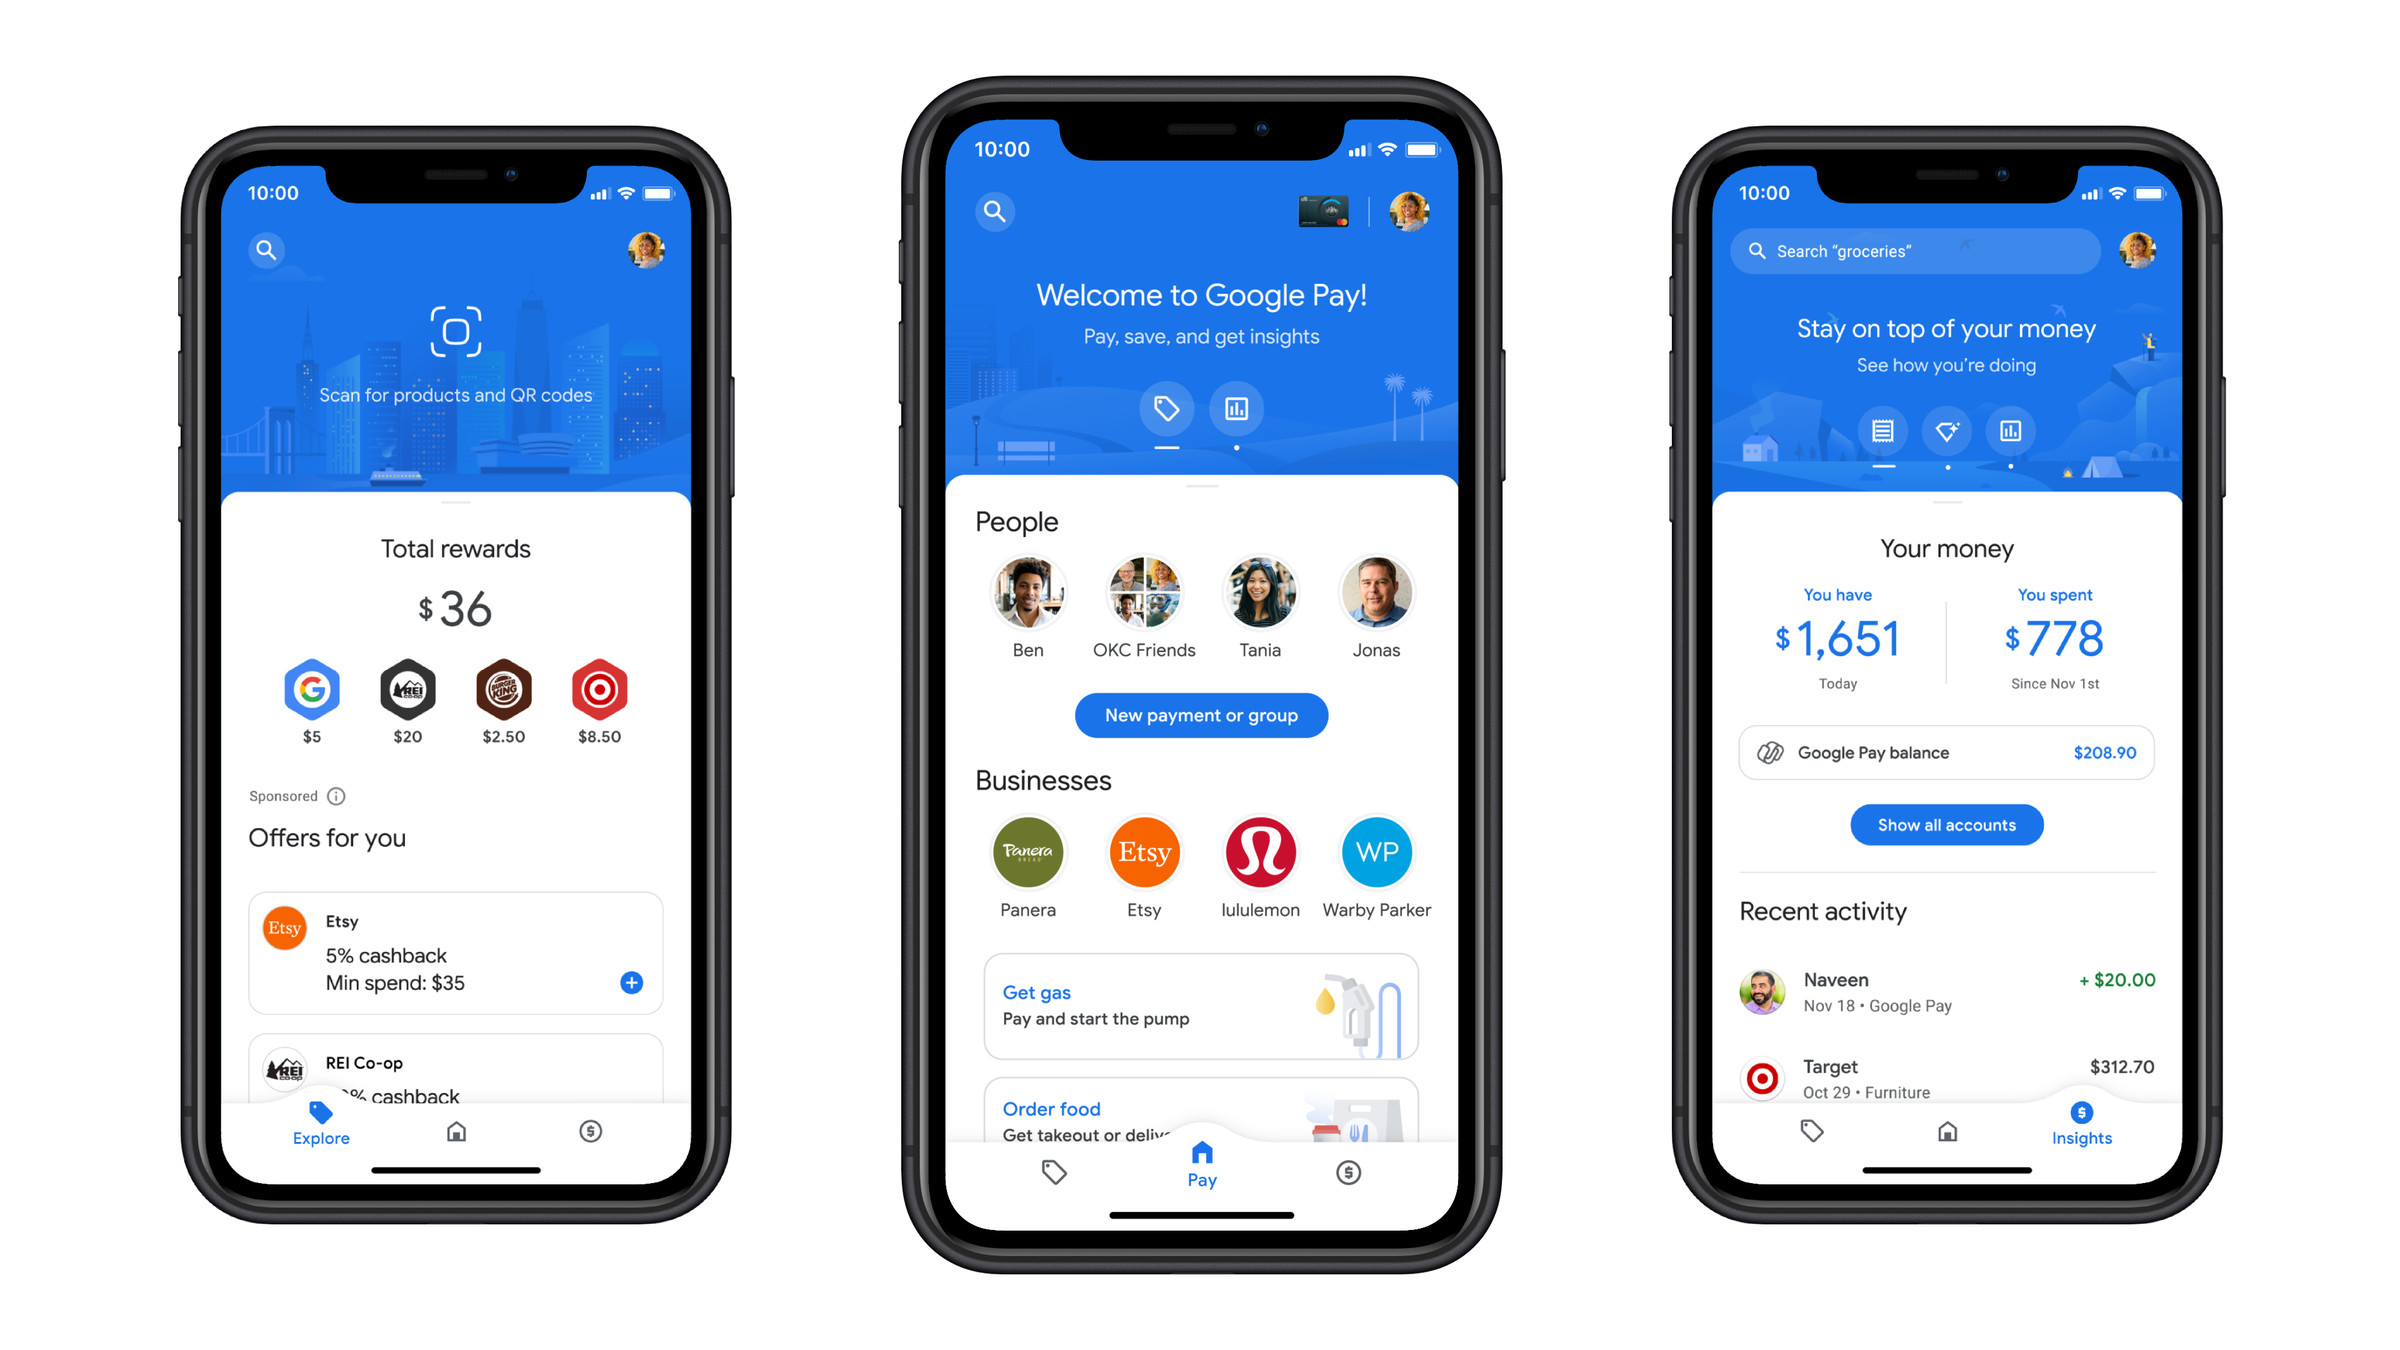 The three main screens in Google Pay